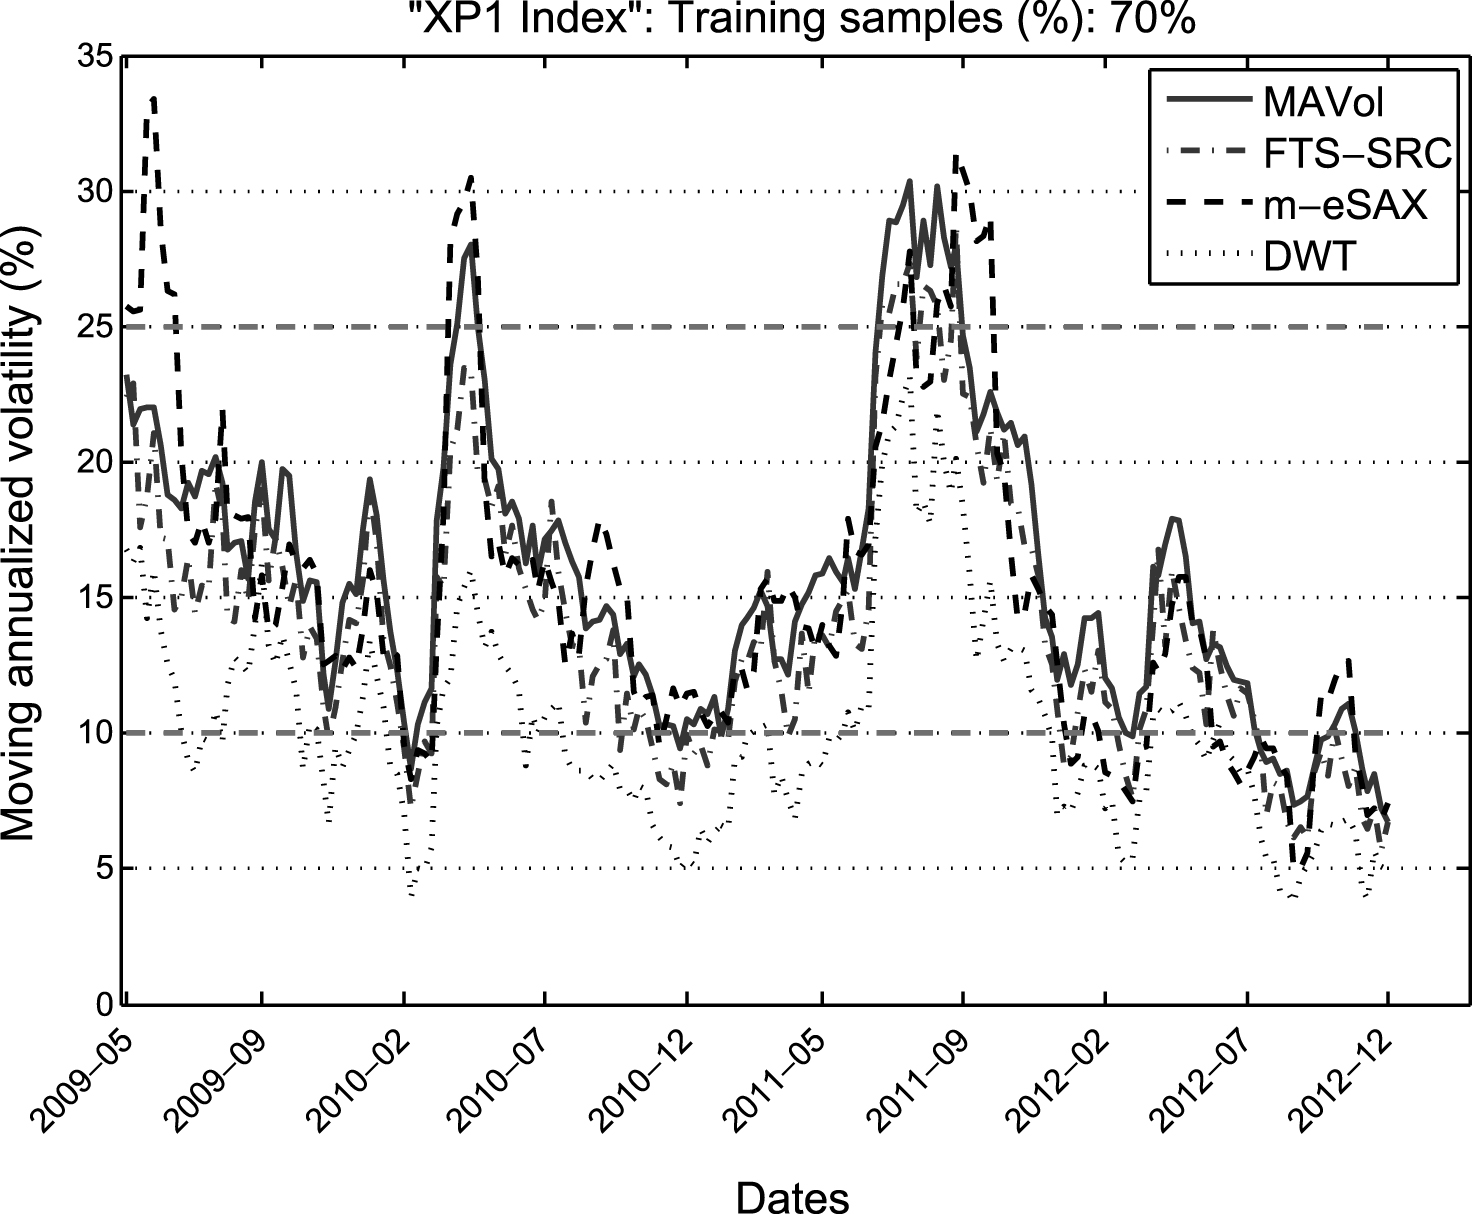 Moving annualized volatility (%) for XP1 index,
estimated in monthly rolling windows with a weekly step-size.
The ground truth volatility (MAVol) is compared against
the volatility values estimated directly from the sparse
patterns associated with FTS-SRC, m-eSAX, and
DWT representations (70% training samples).